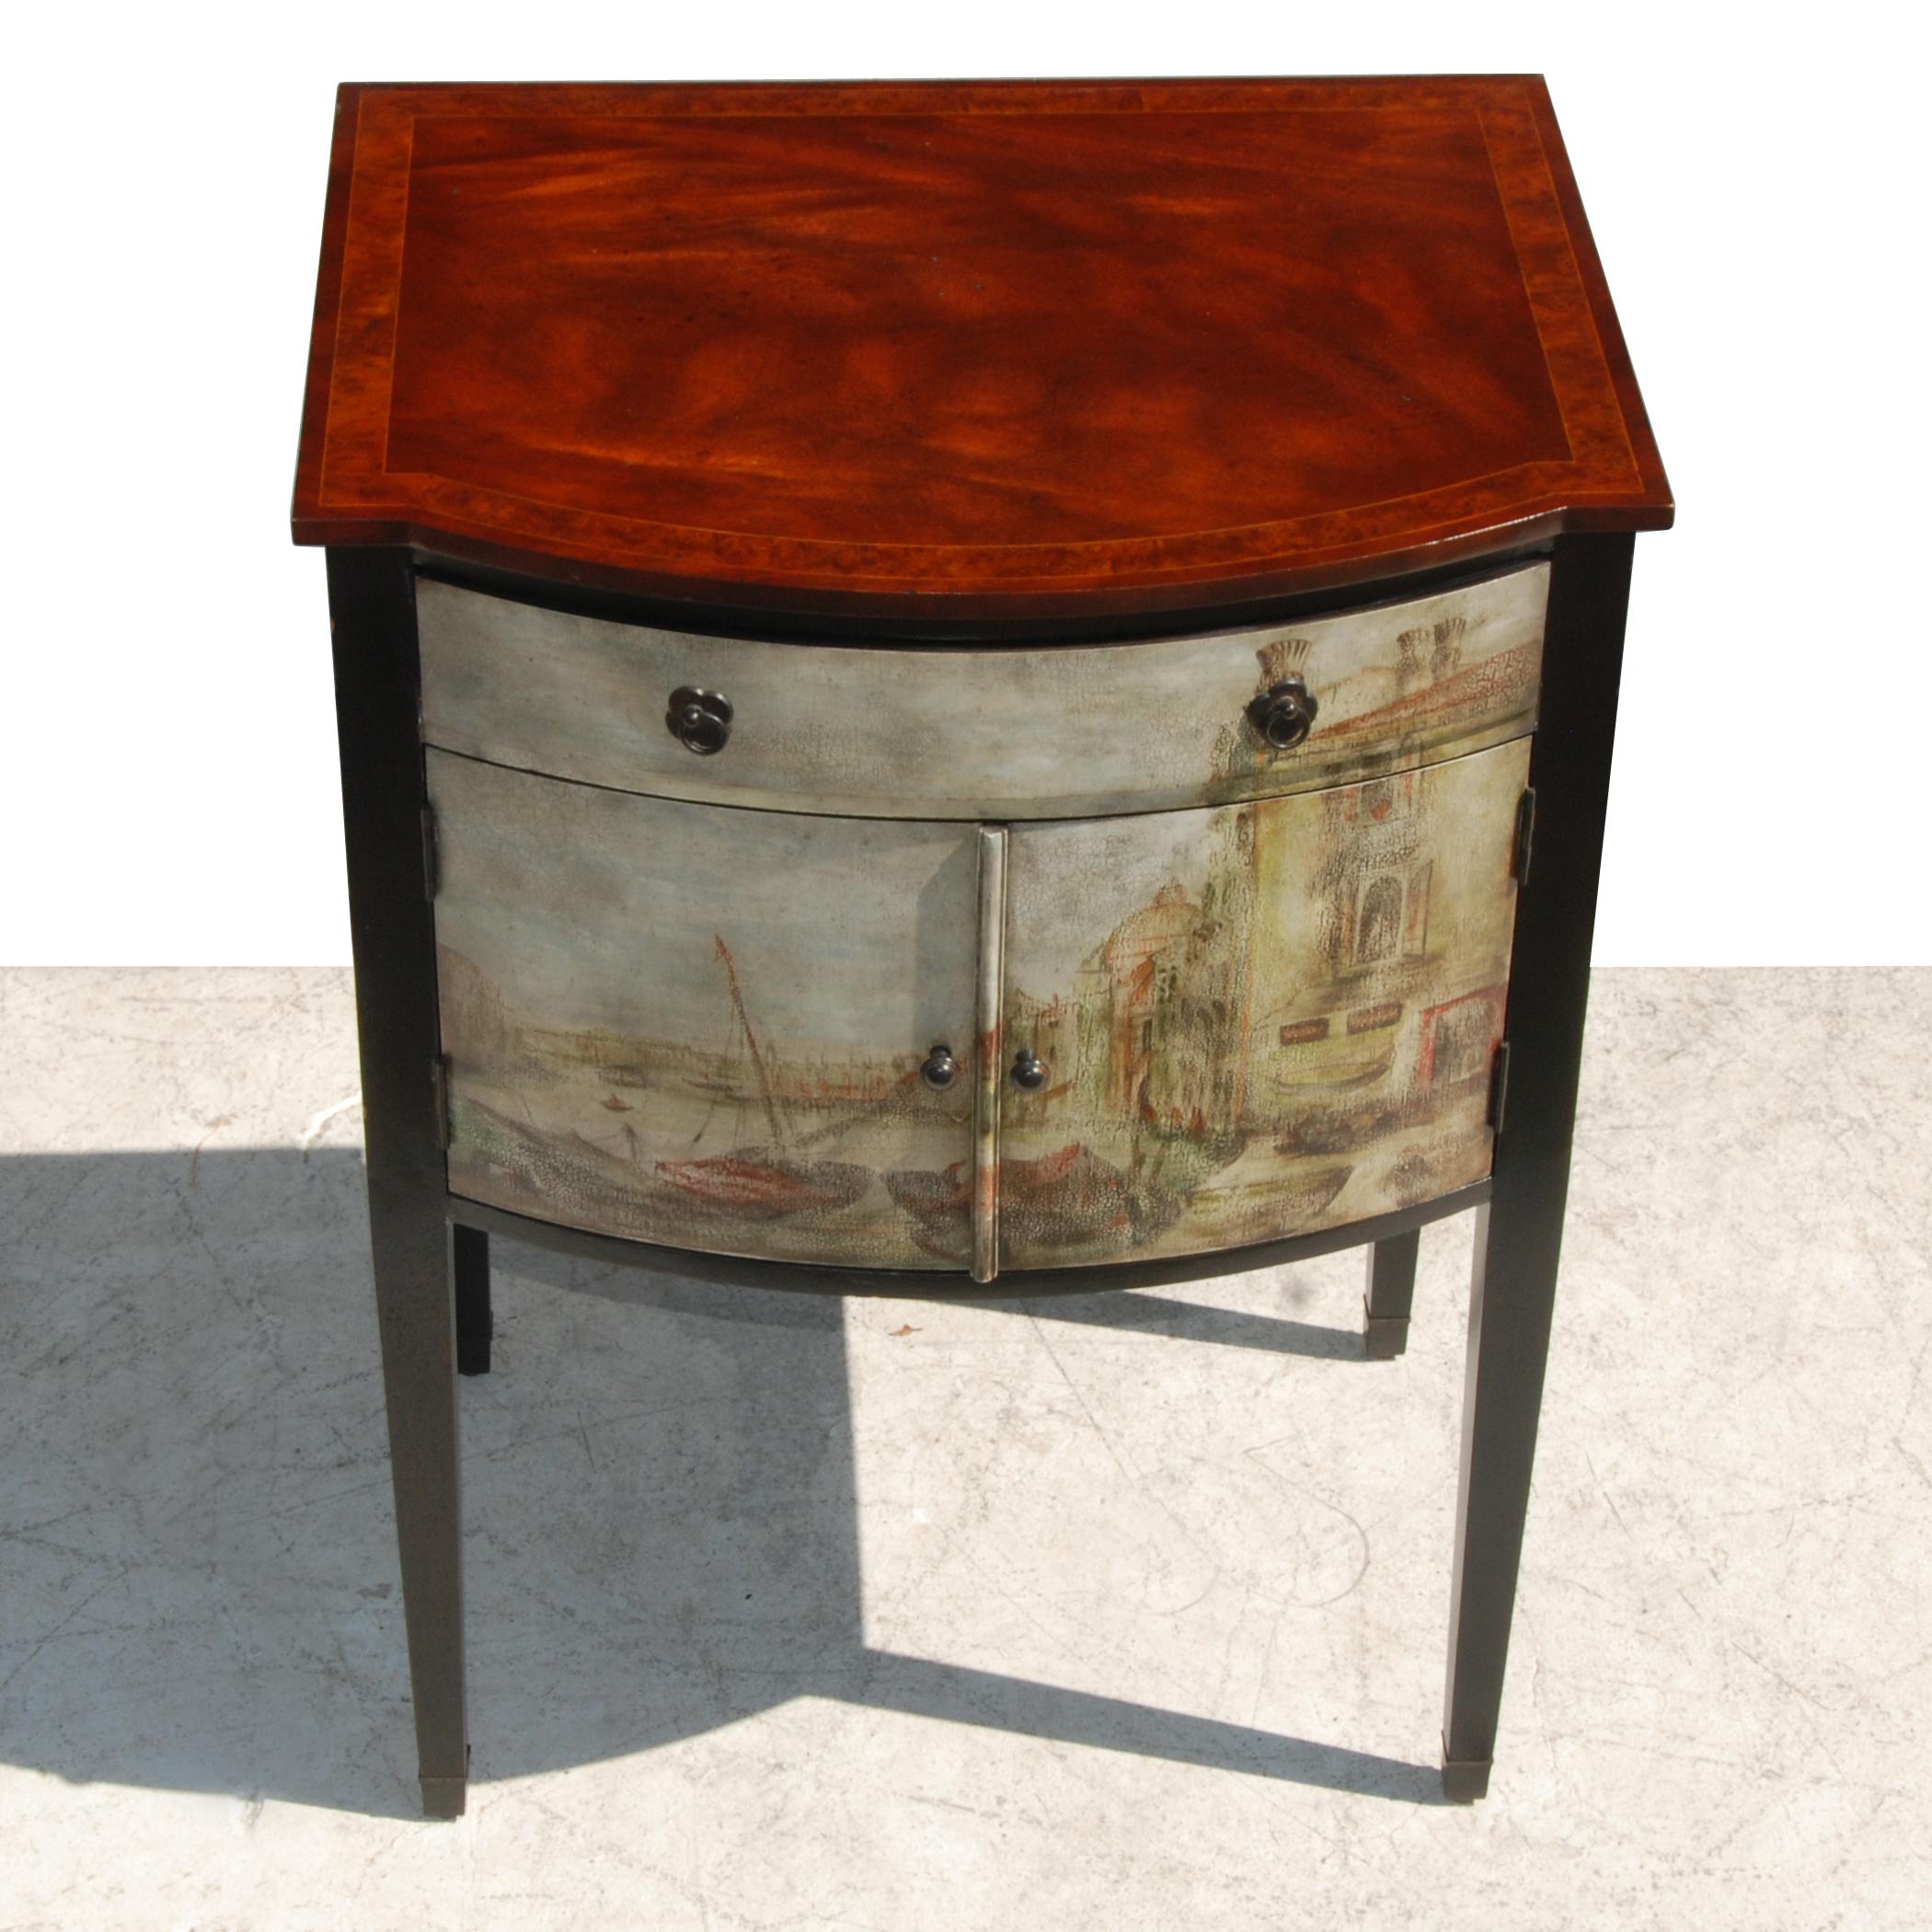 Maitland Smith Venetian style nightstand or end table

 
Wood cabinet is adorned in front and sides with a hand-painted European scene.
Top drawer and lower cabinet has antiqued pulls.
Antiqued cherry top with ebonized legs.
 